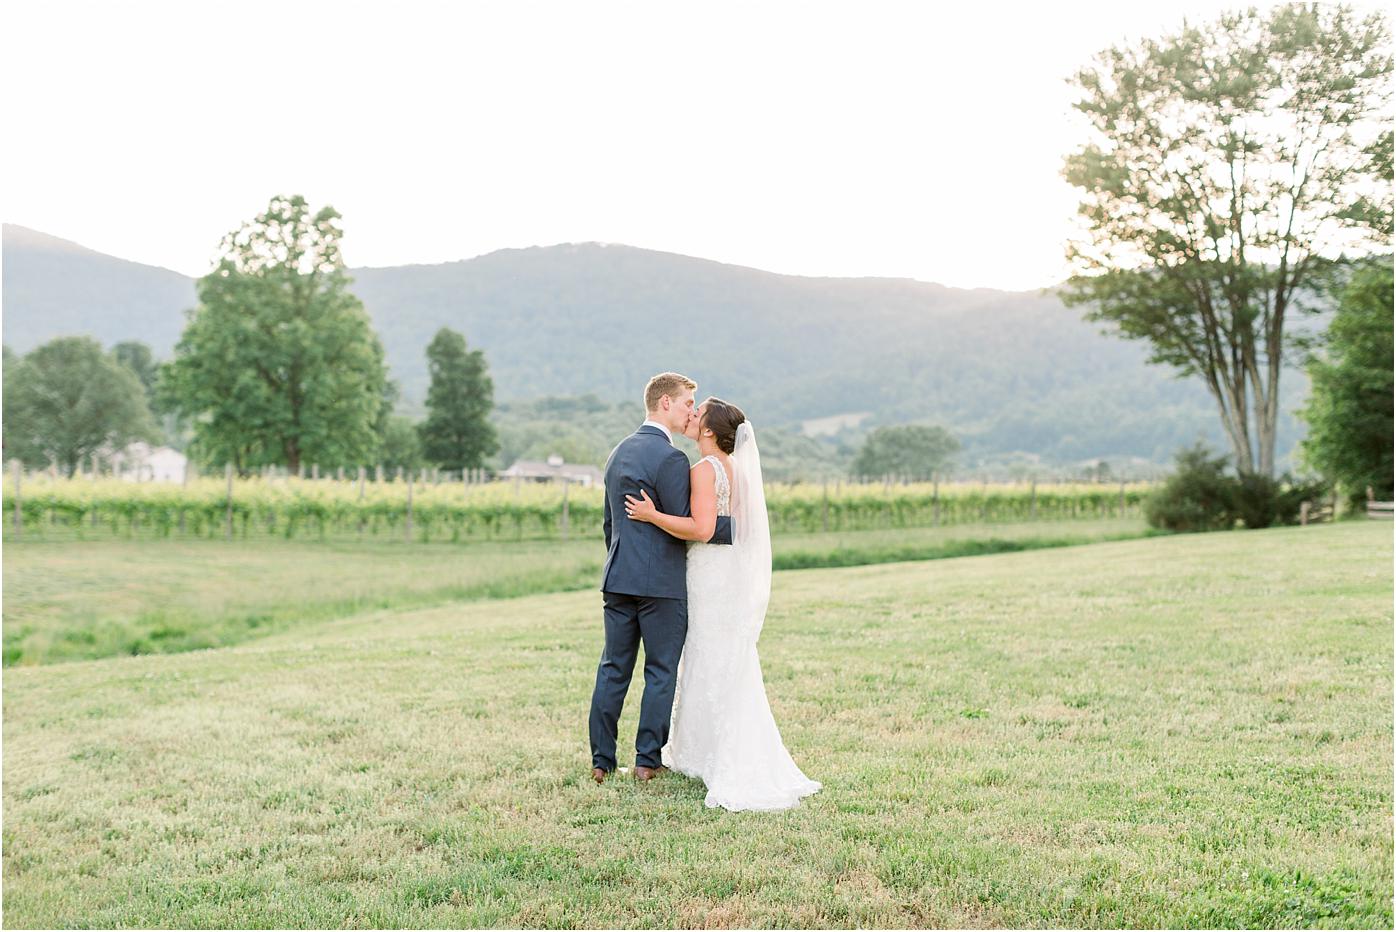 Bride and groom sharing a kiss after their Veritas Winery wedding at sunset